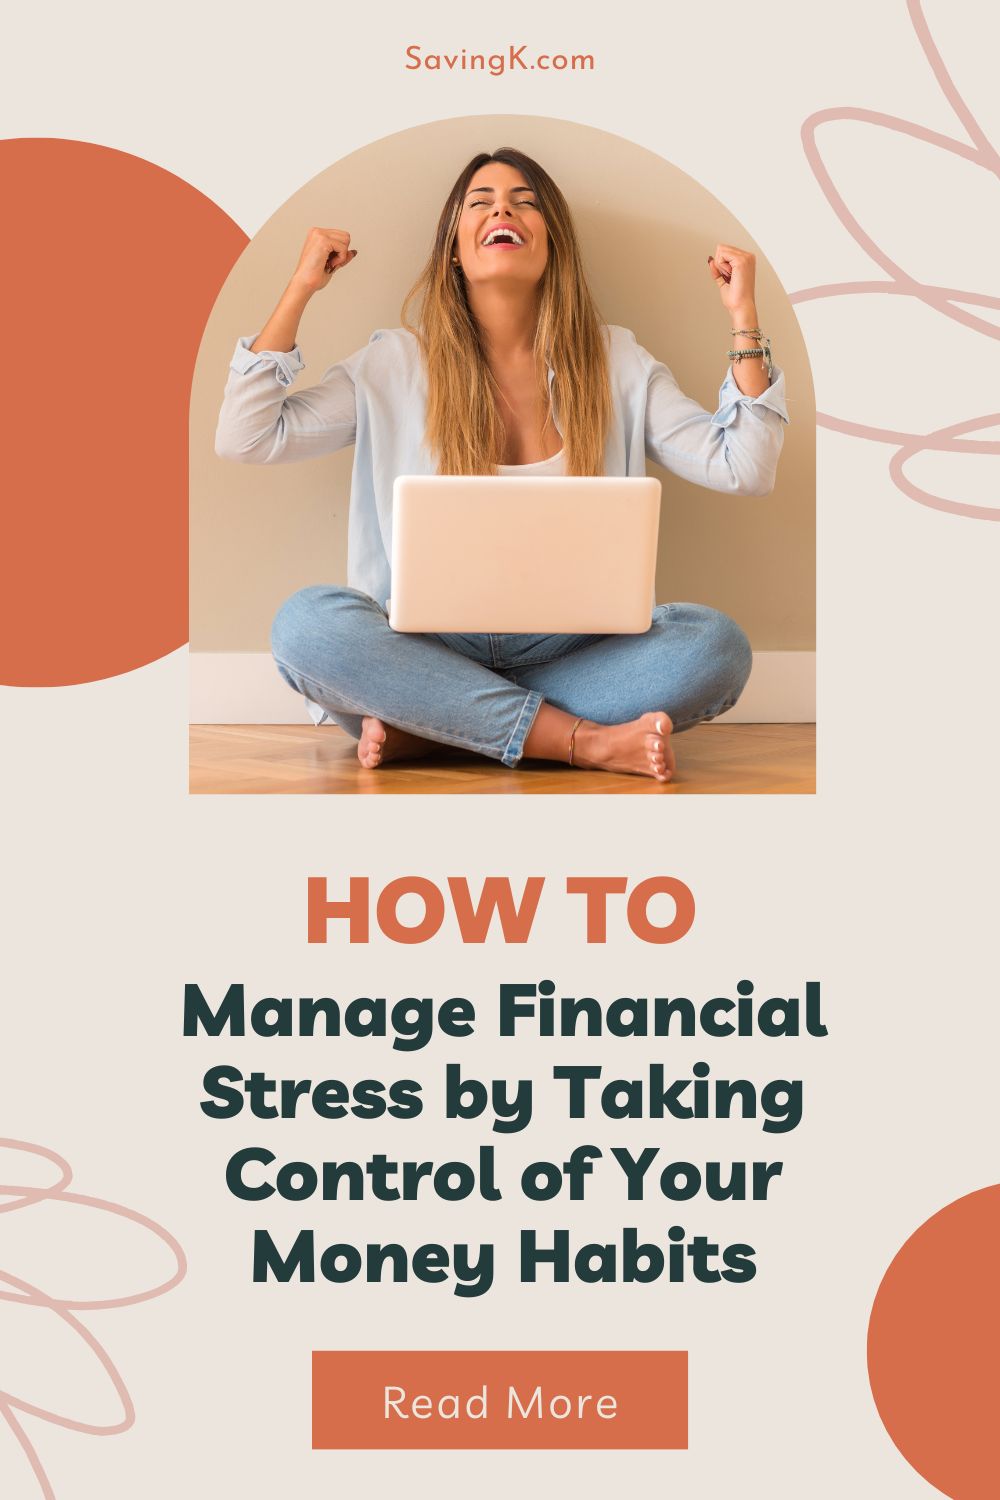 Manage Financial Stress by Taking Control of Your Money Habits